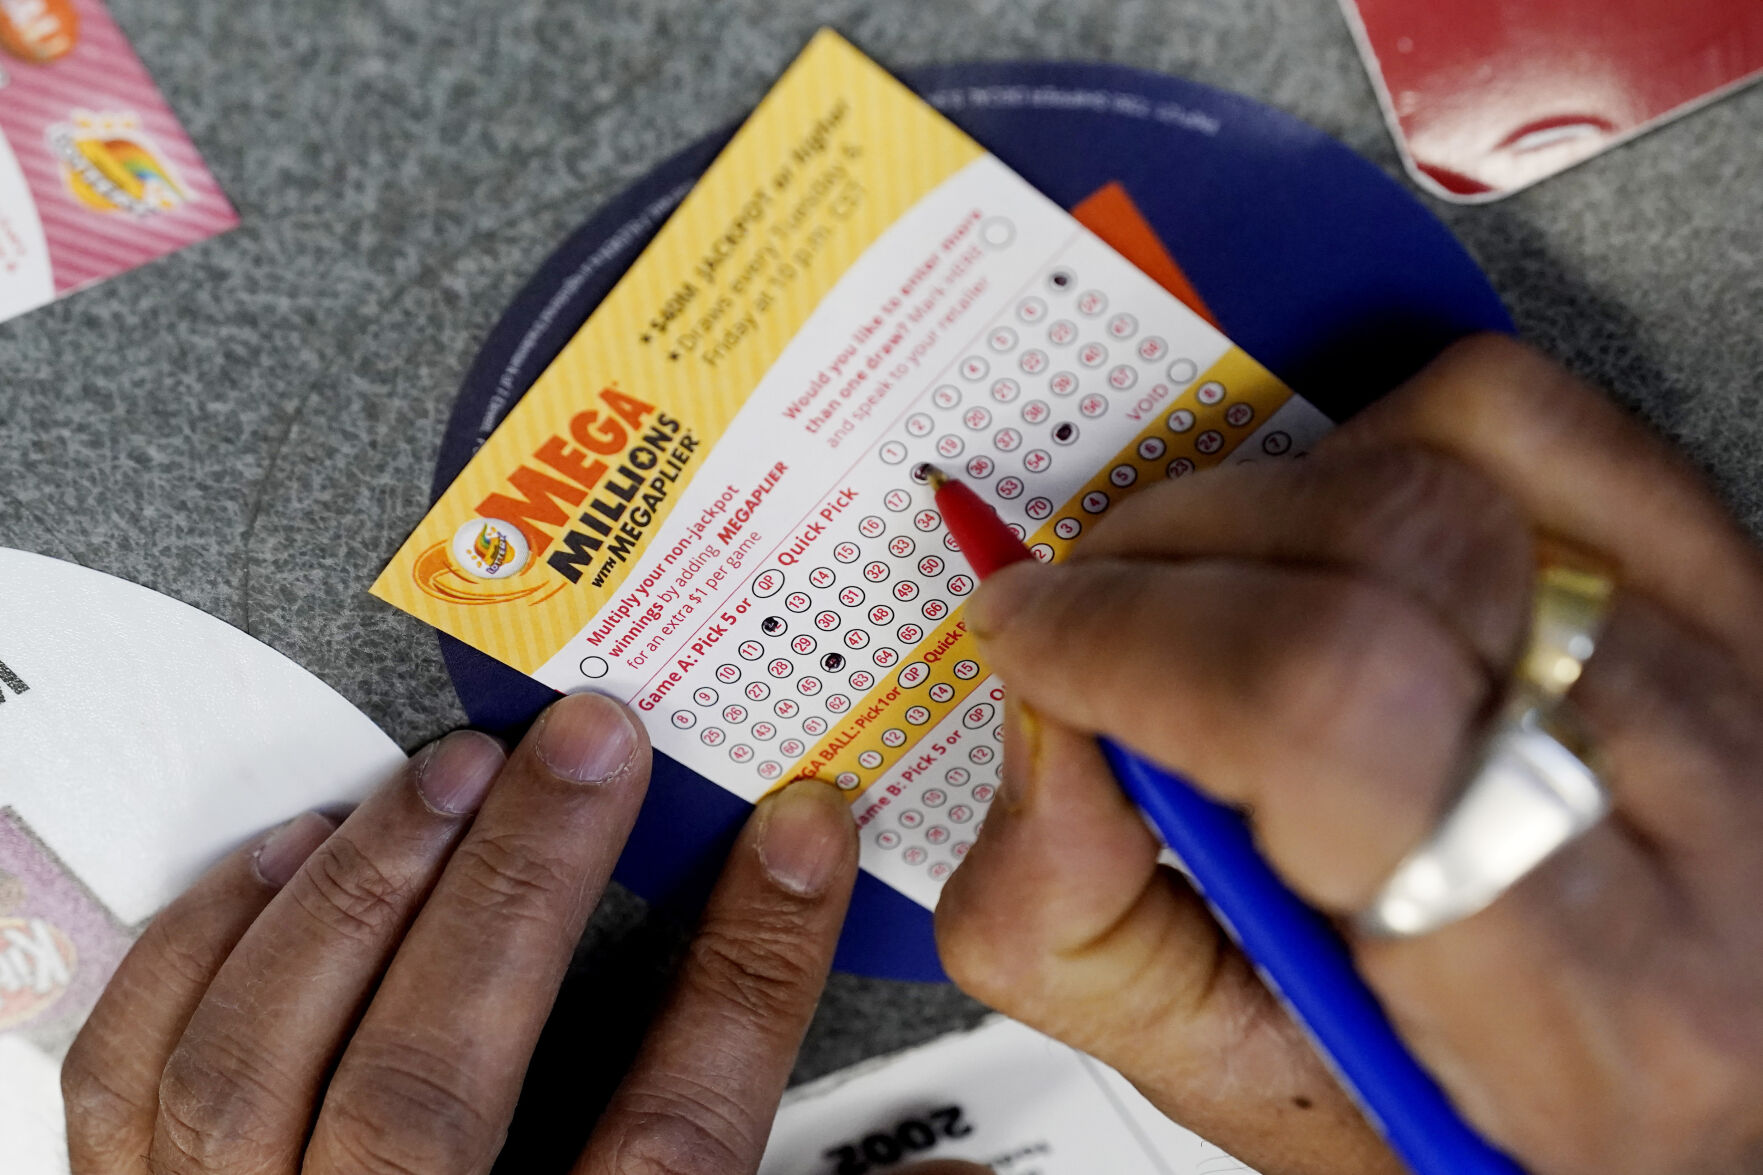 <p>FILE - A customer fills out a Mega Millions lottery ticket at a convenience store in Northbrook, Ill., on Jan. 6, 2021. The holiday shopping season, for Mega Millions lottery ticket buyers, at least, is ramping up as officials say the estimated jackpot for the drawing the night of Tuesday, Dec. 27, 2022, has surpassed half a billion dollars. (AP Photo/Nam Y. Huh, File)</p>   PHOTO CREDIT: Nam Y. Huh 